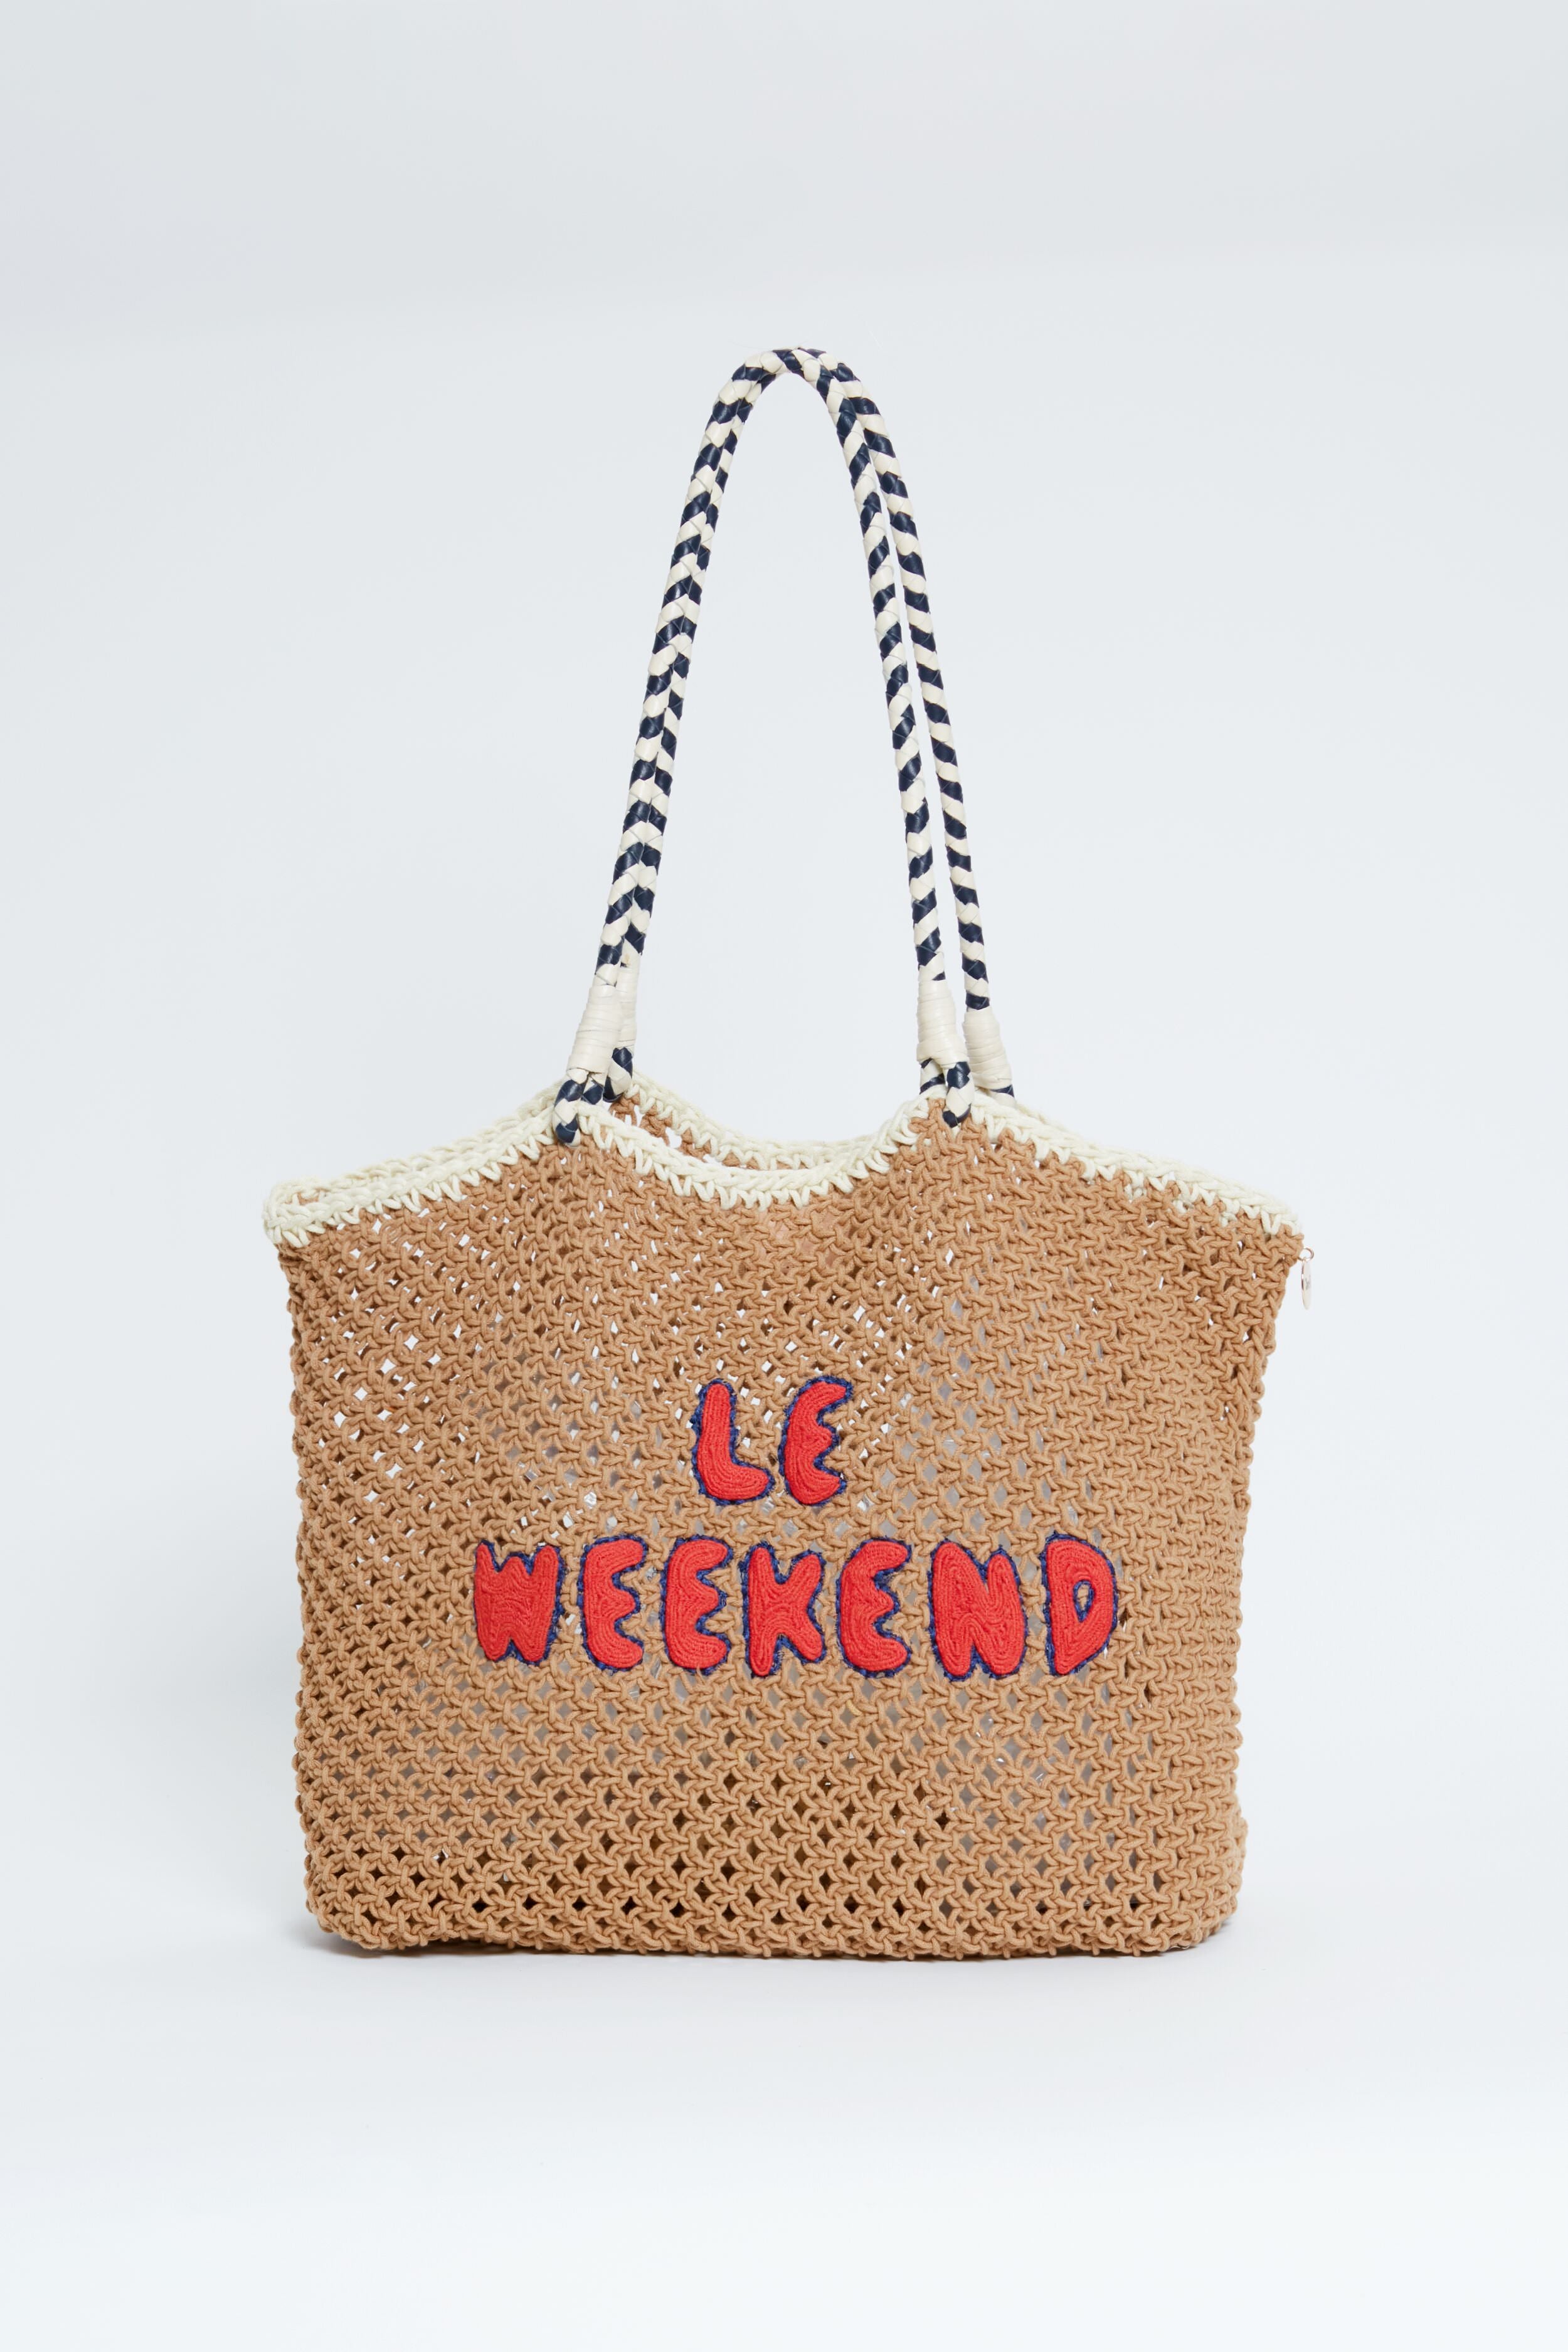 clare v le weekend tote